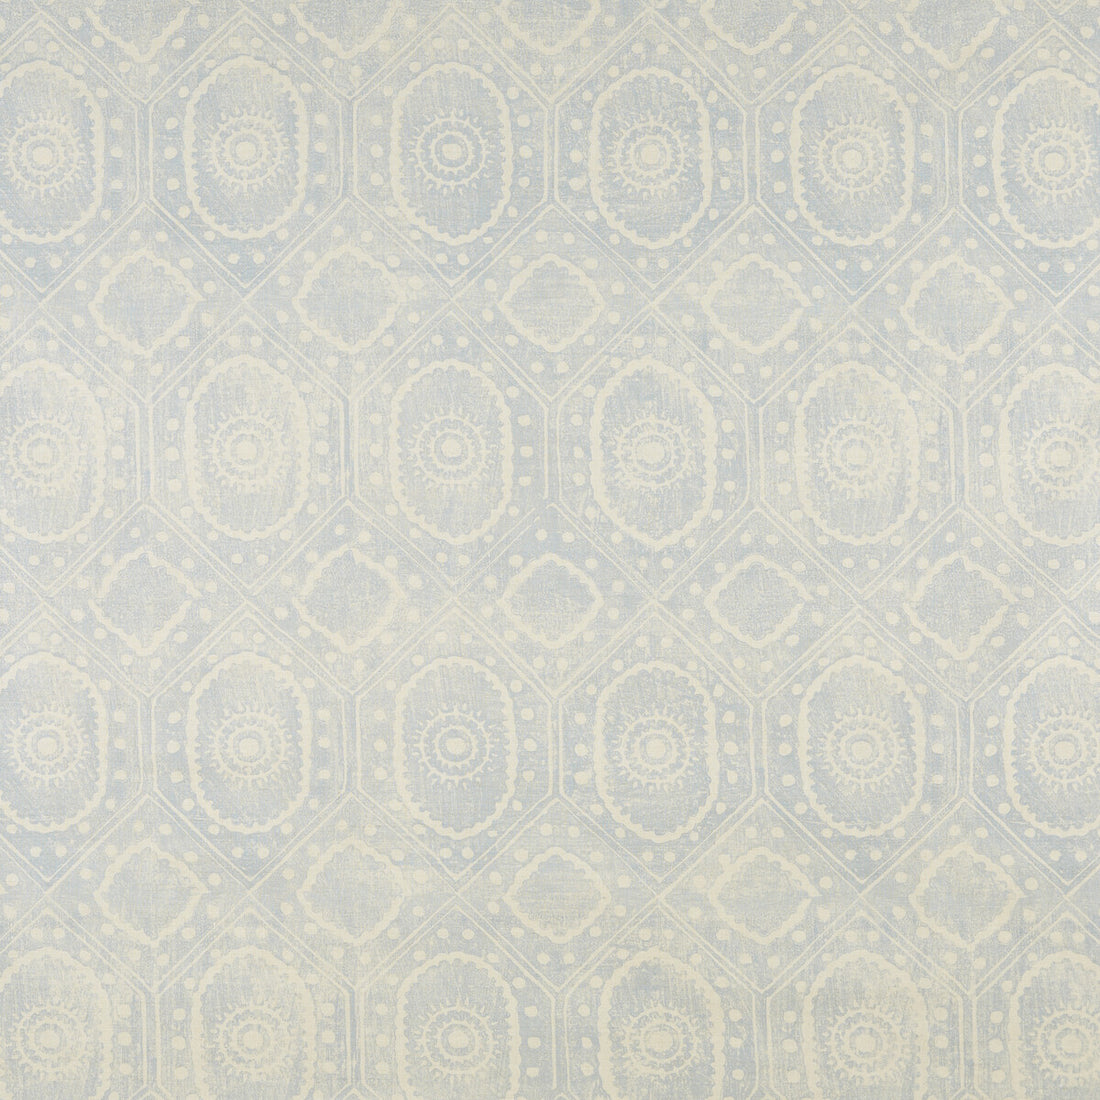 Diamond fabric in pale blue color - pattern BFC-3643.5.0 - by Lee Jofa in the Blithfield collection